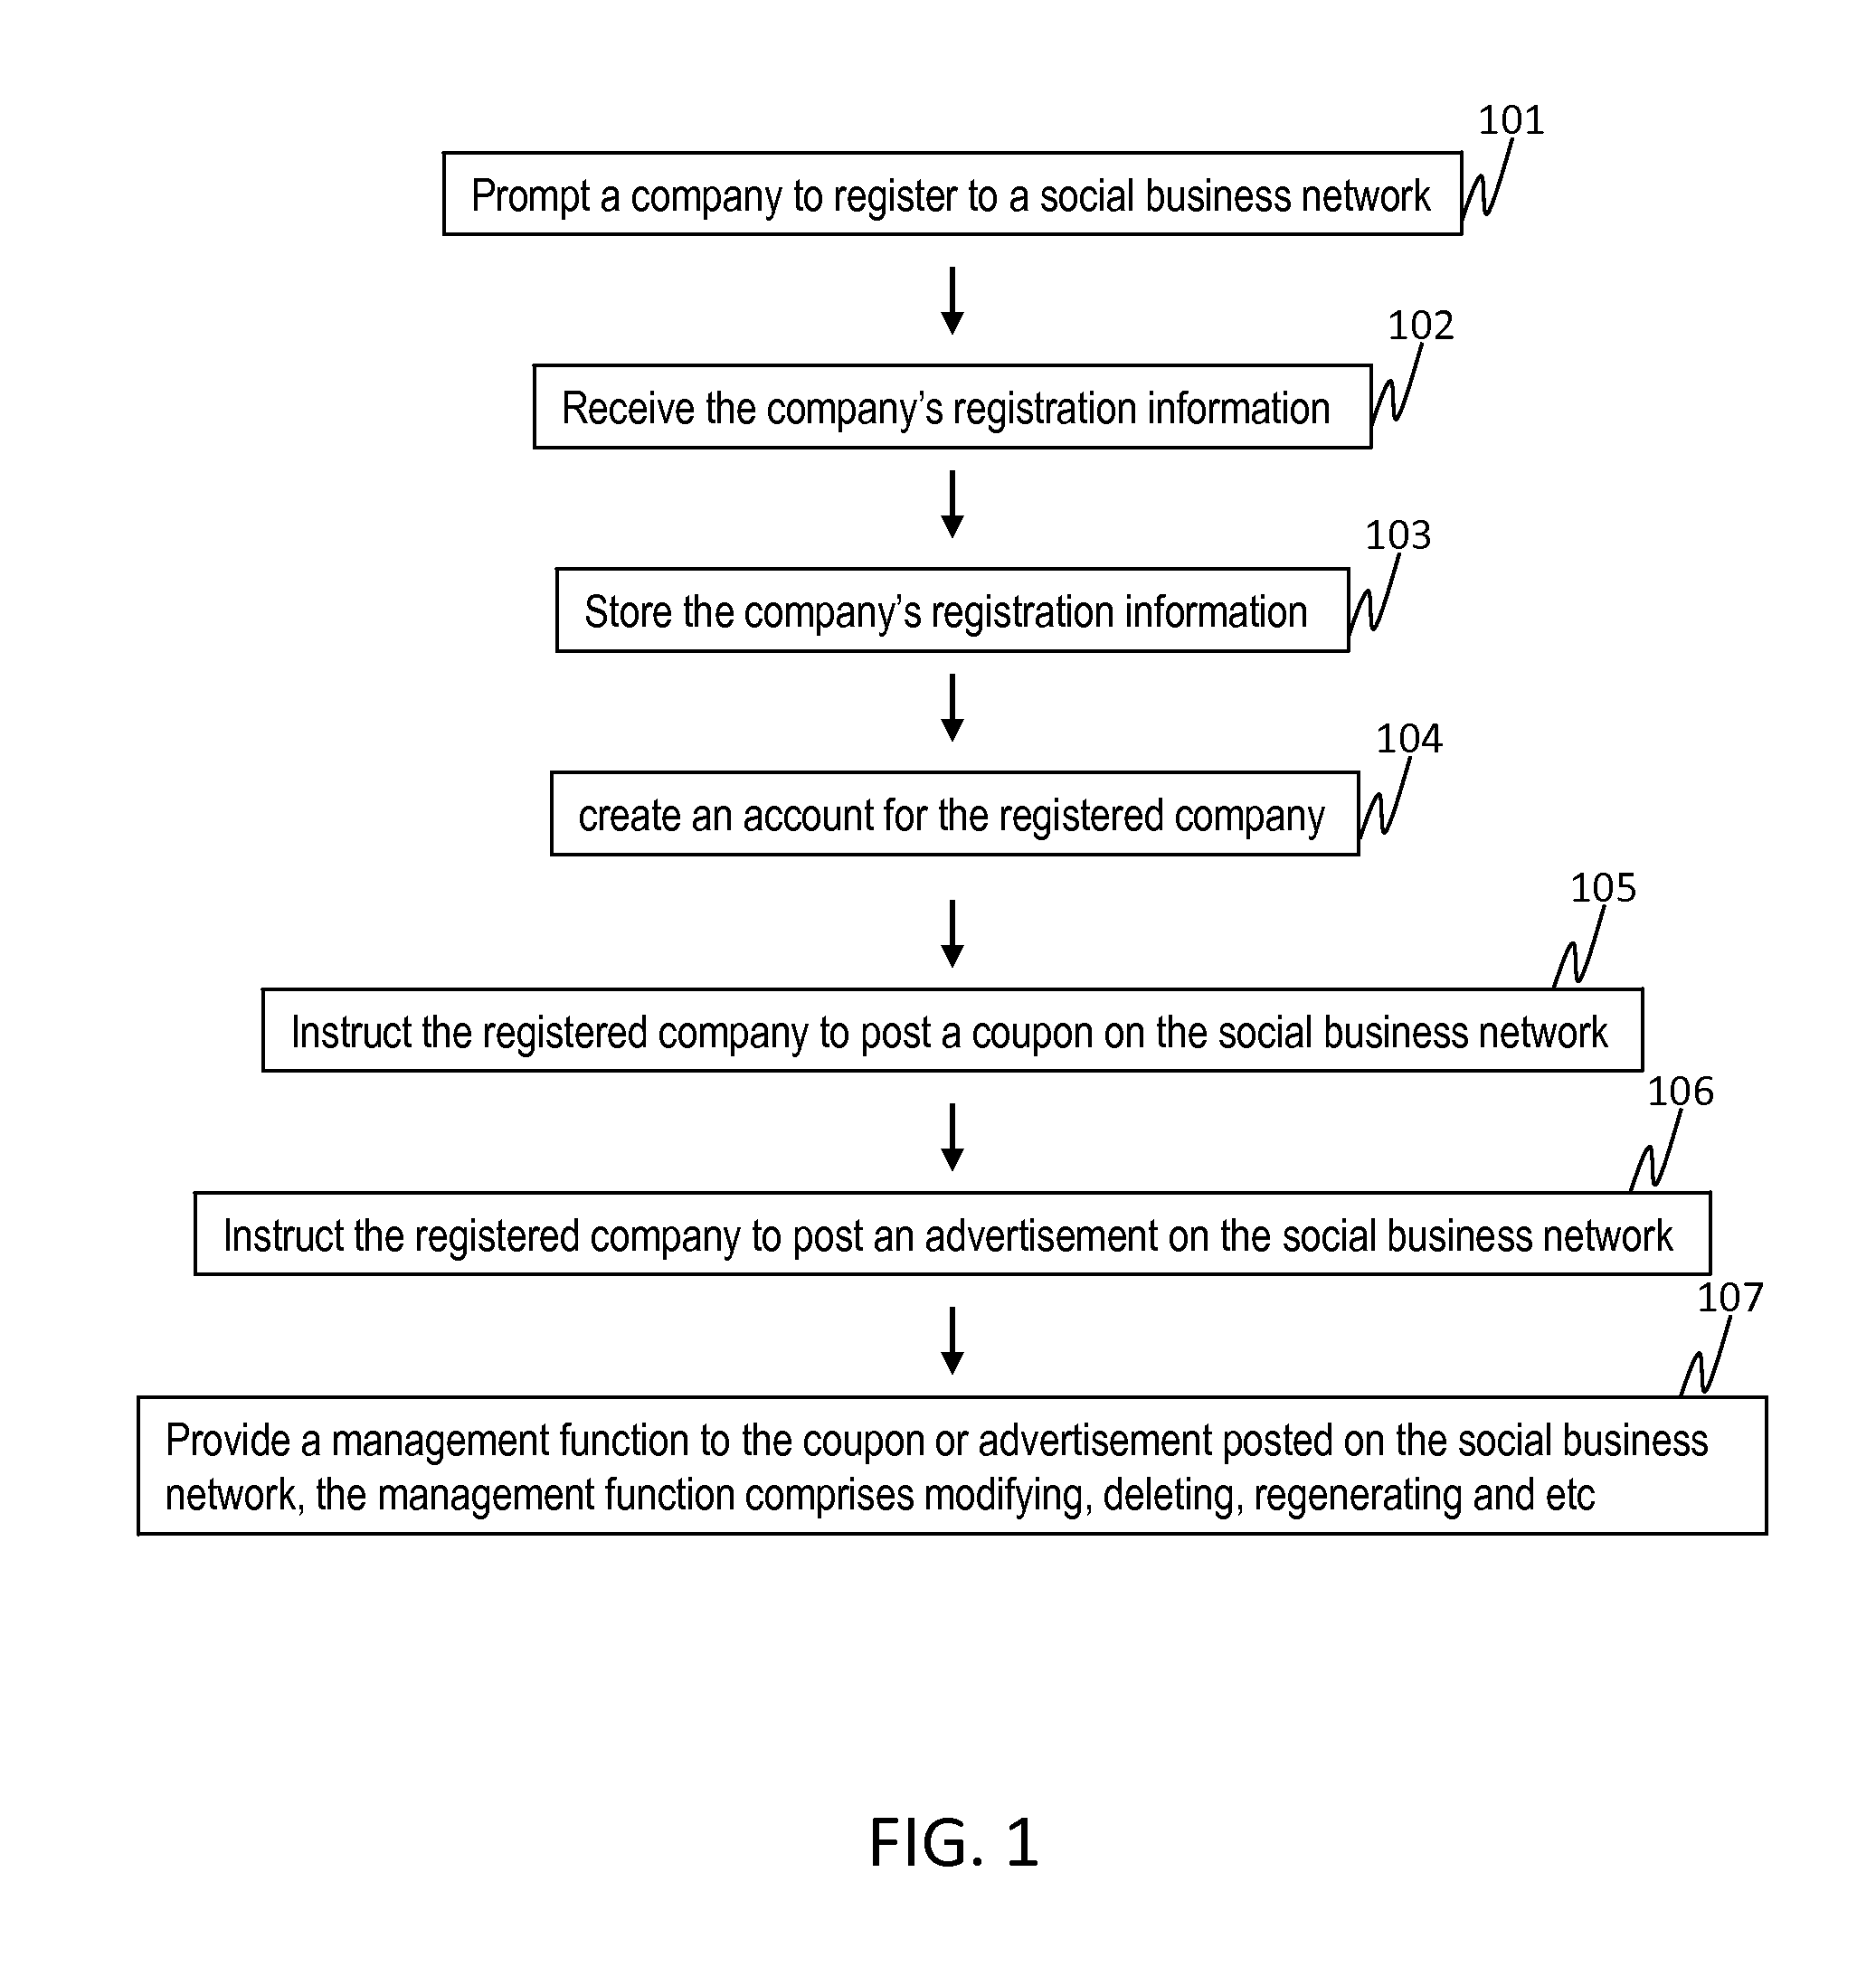 Method And System For Providing Digital Coupons in a Social Business Network